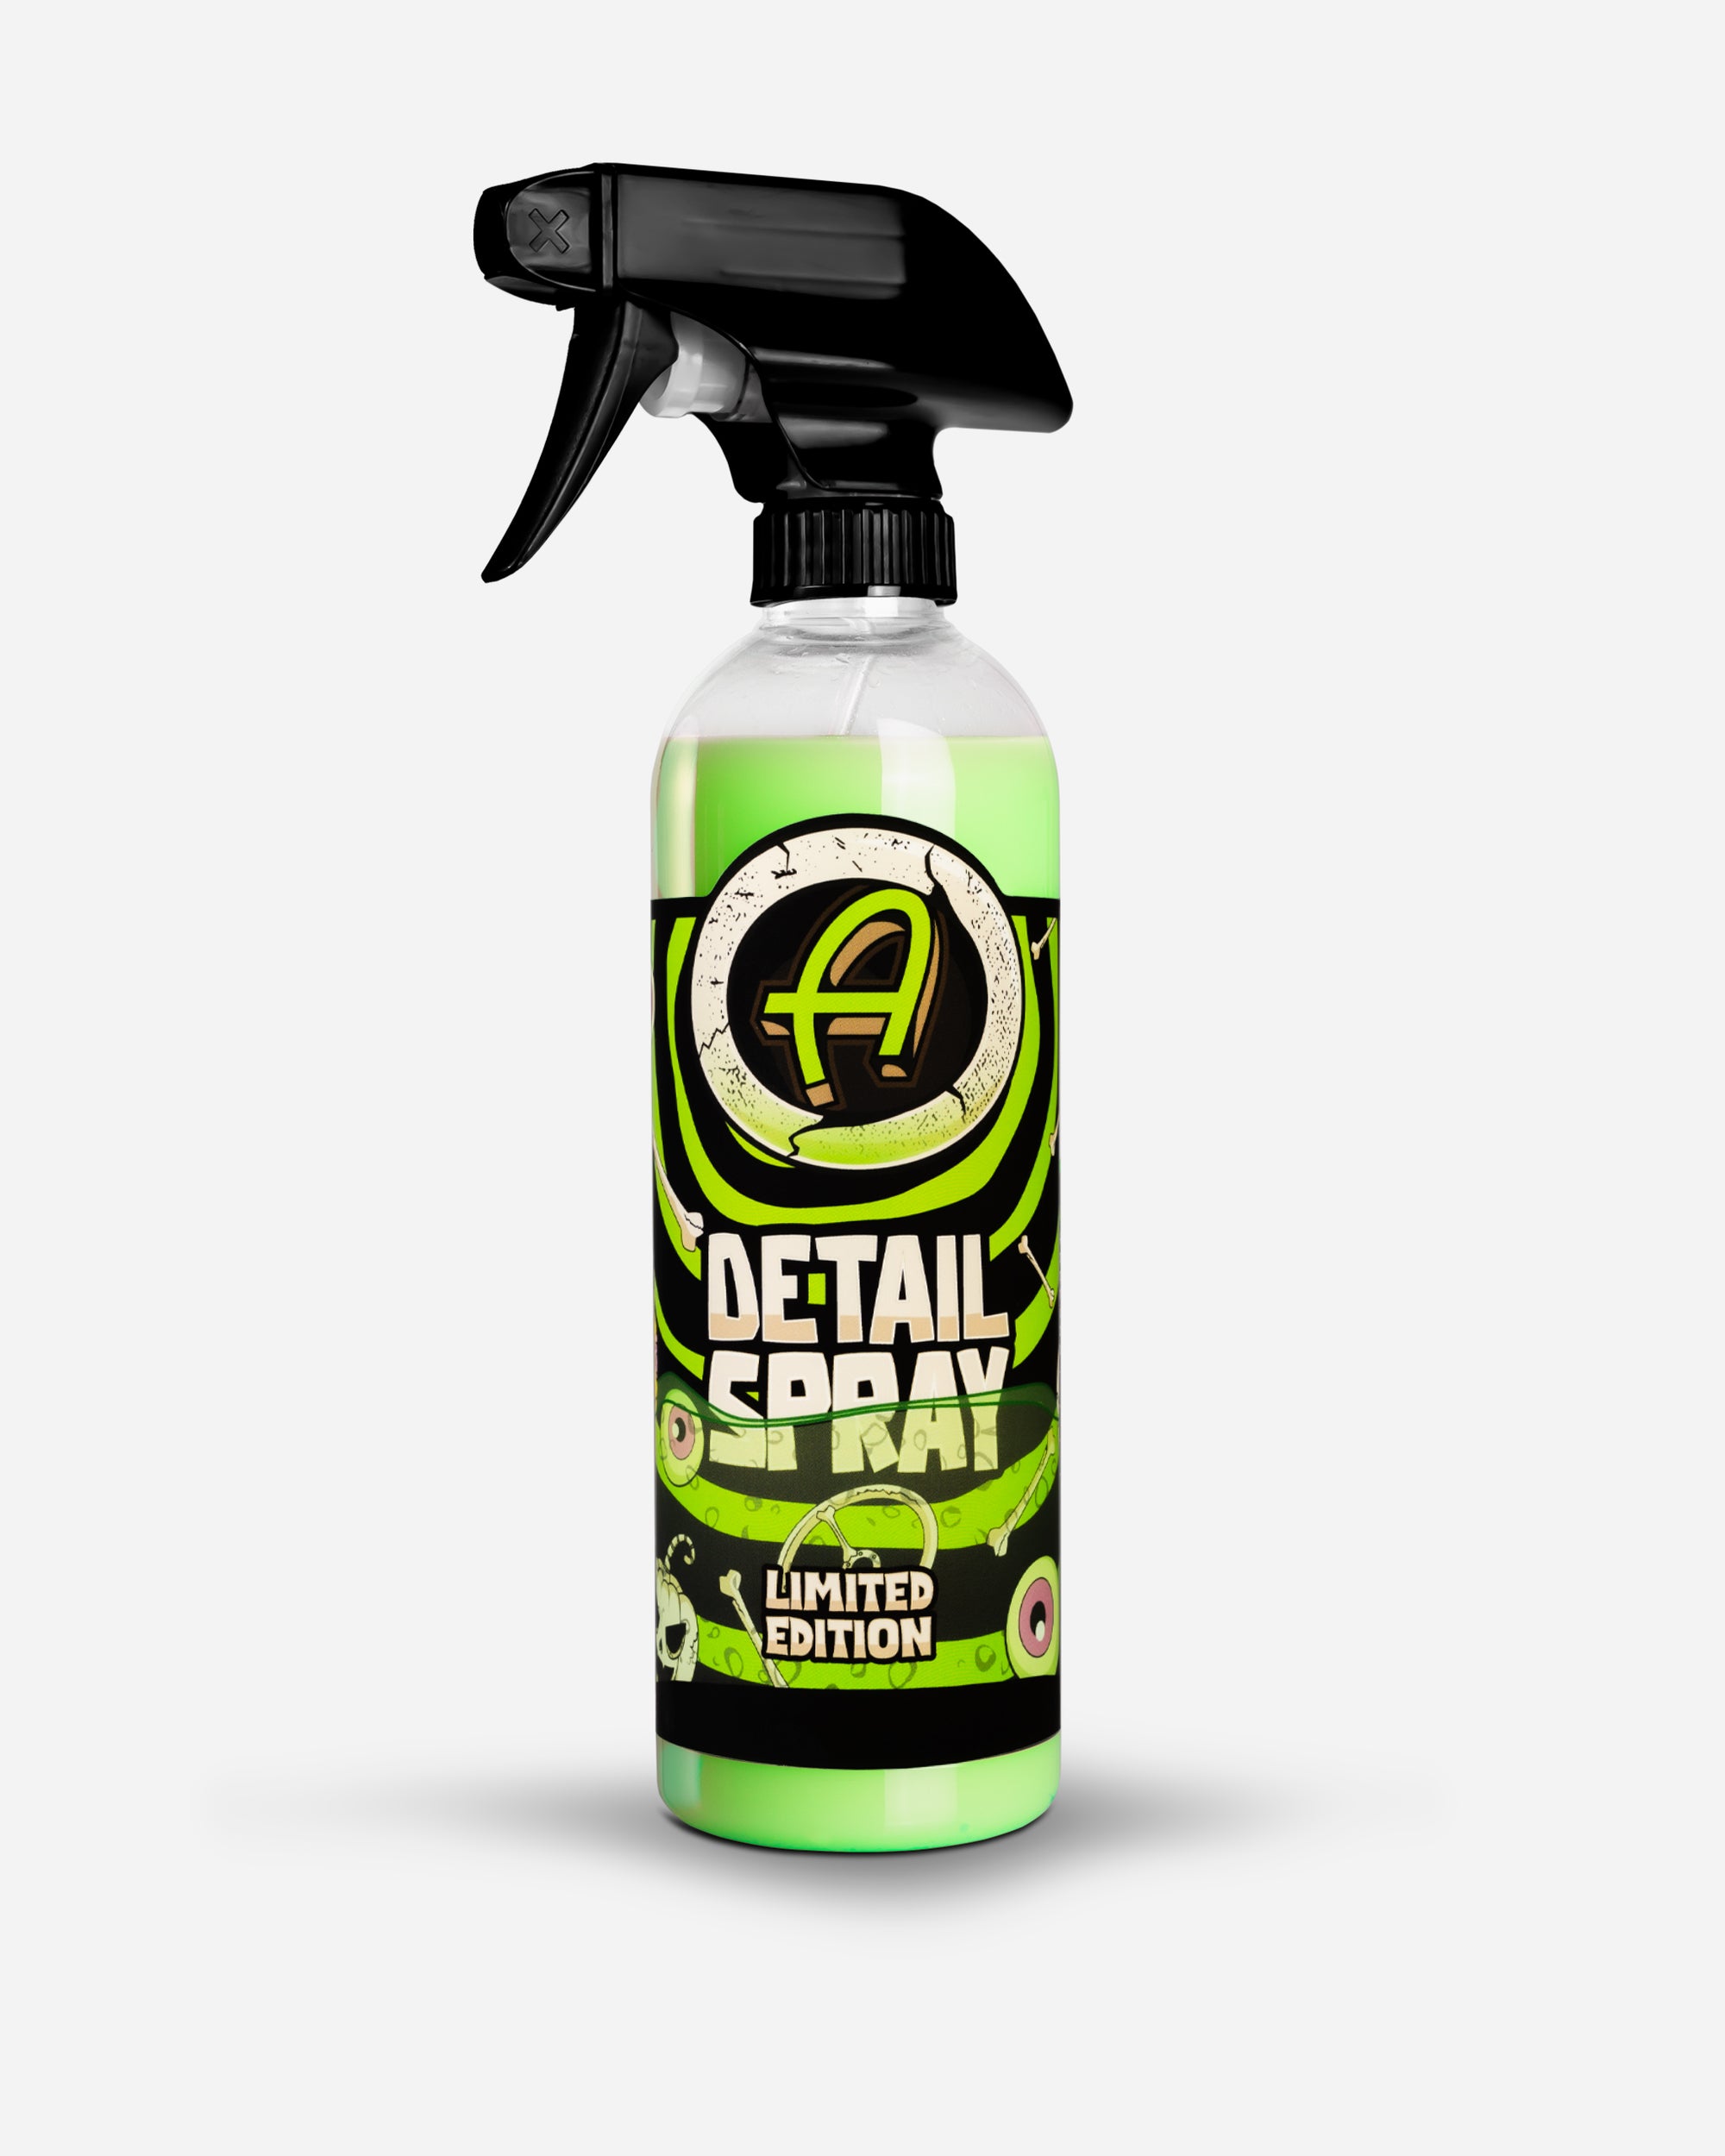 Sustainable Auto Detailing Supplies: What You Need to Know?